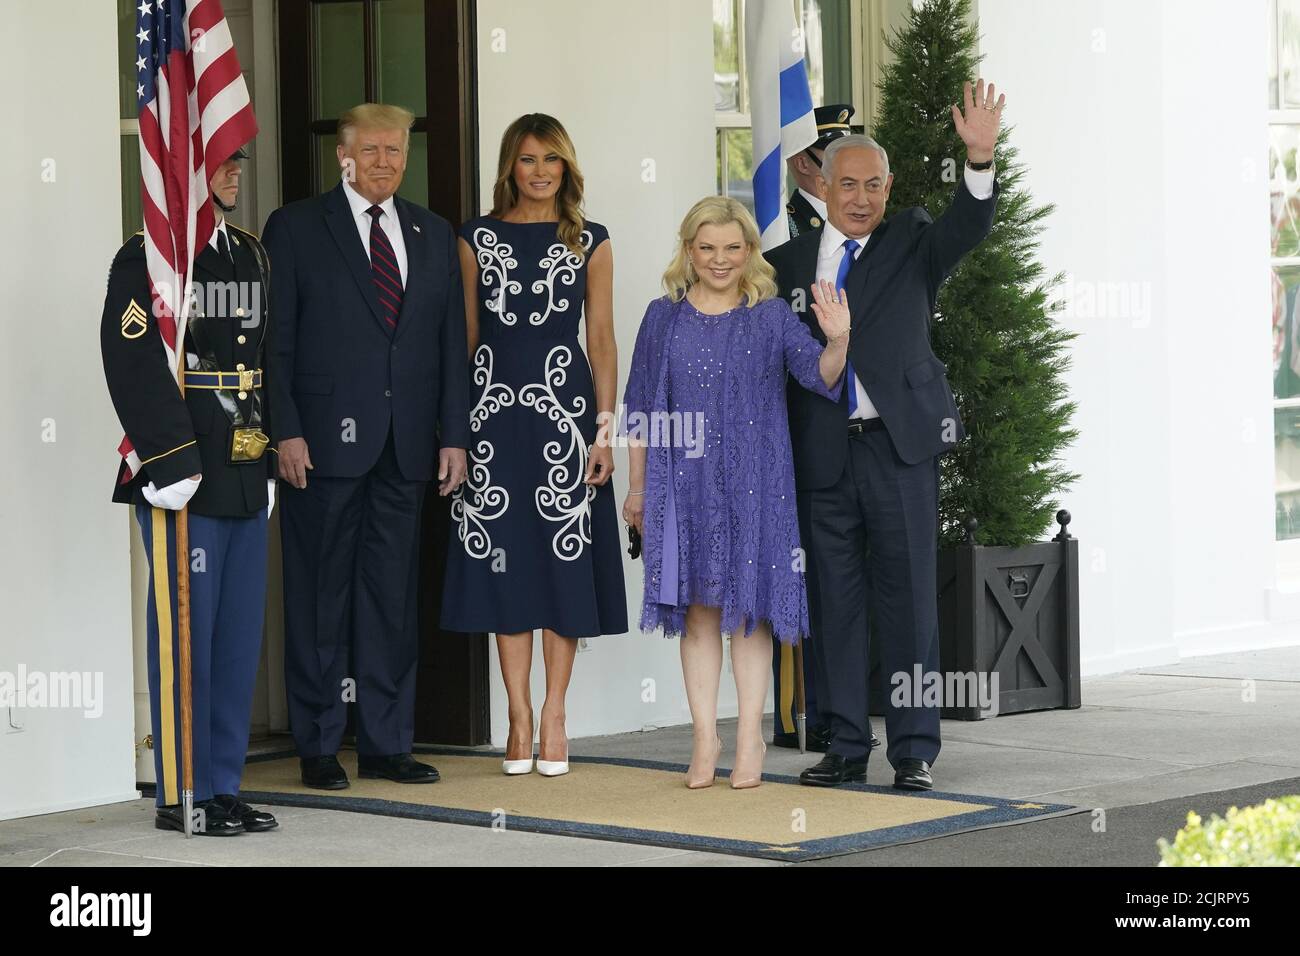 Washington DC, USA. 15th Sep, 2020. President Donald J. Trump and first lady Melania Trump welcome Prime Minister Benjamin Netanyahu of Israel, and his wife Sara, to the White House in Washington, DC on Tuesday, September 15, 2020. Netanyahu is in Washington to sign the Abraham Accords, a peace treaty between Israel and the United Arab Emirates, and a declaration of intent to make peace with Bahrain. Credit: UPI/Alamy Live News Stock Photo